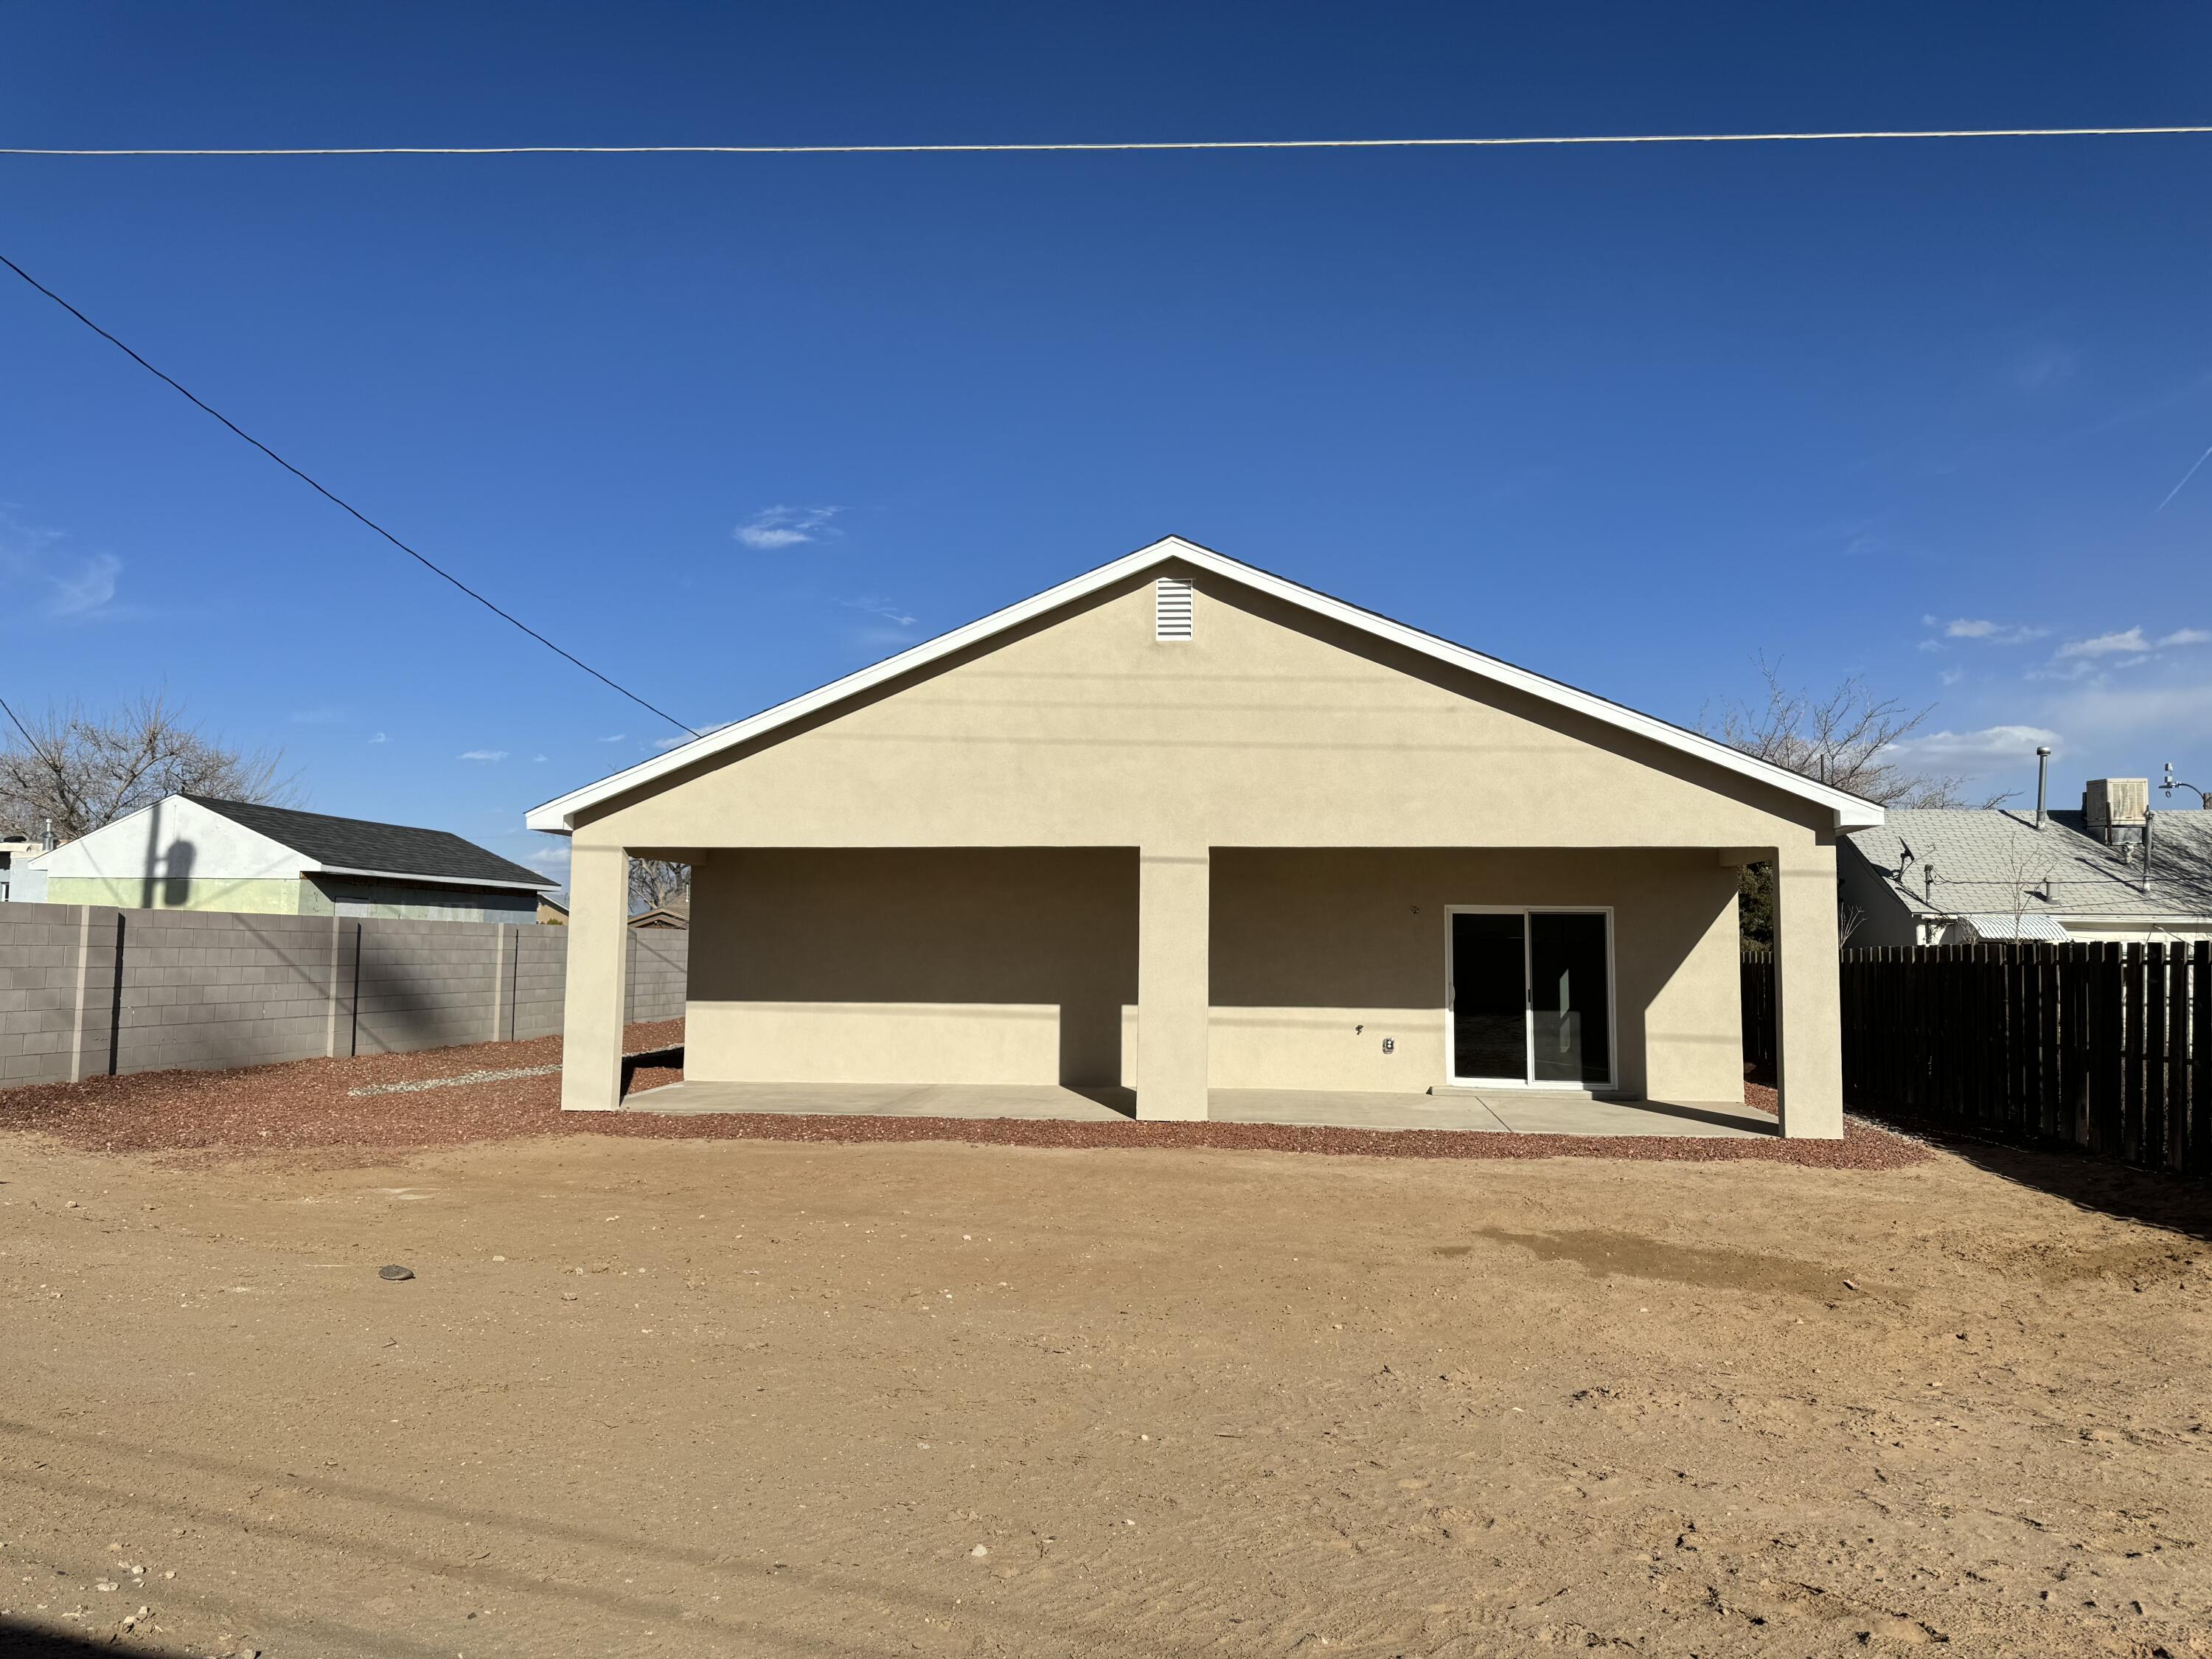 451 63rd Street NW, Albuquerque, New Mexico 87105, 3 Bedrooms Bedrooms, ,2 BathroomsBathrooms,Residential,For Sale,451 63rd Street NW,1044938